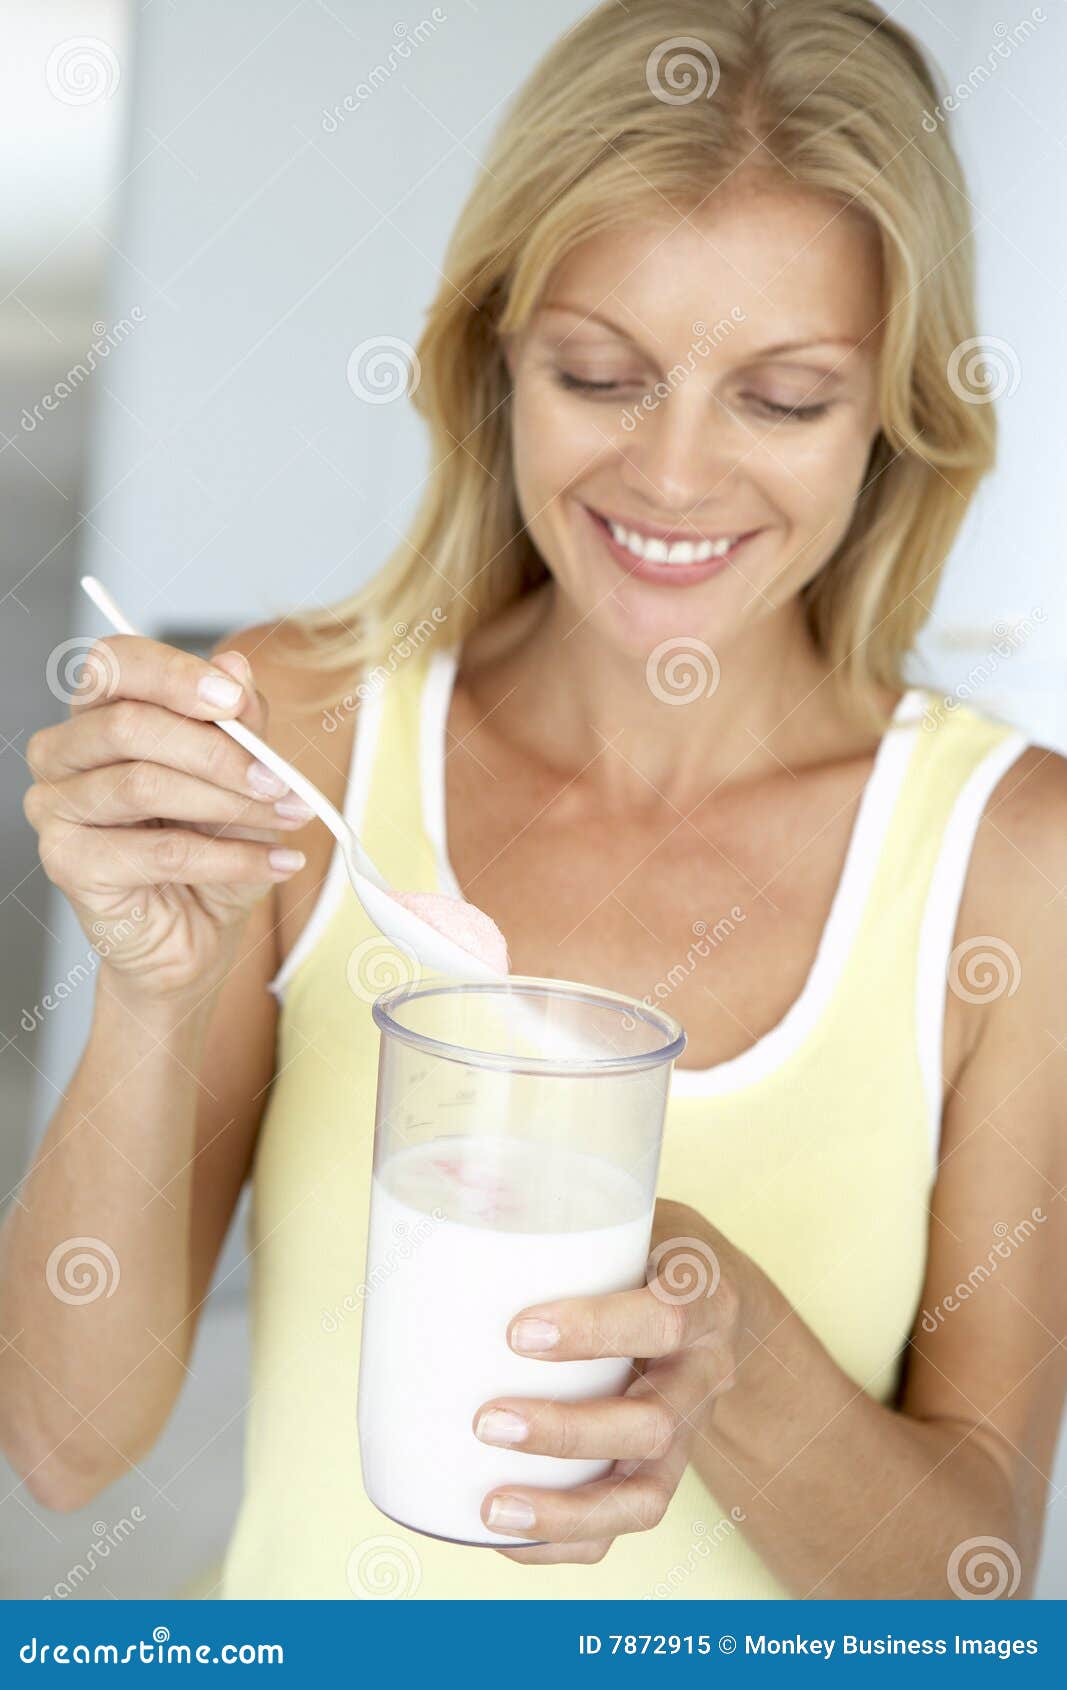 mid adult woman holding dietary supplements